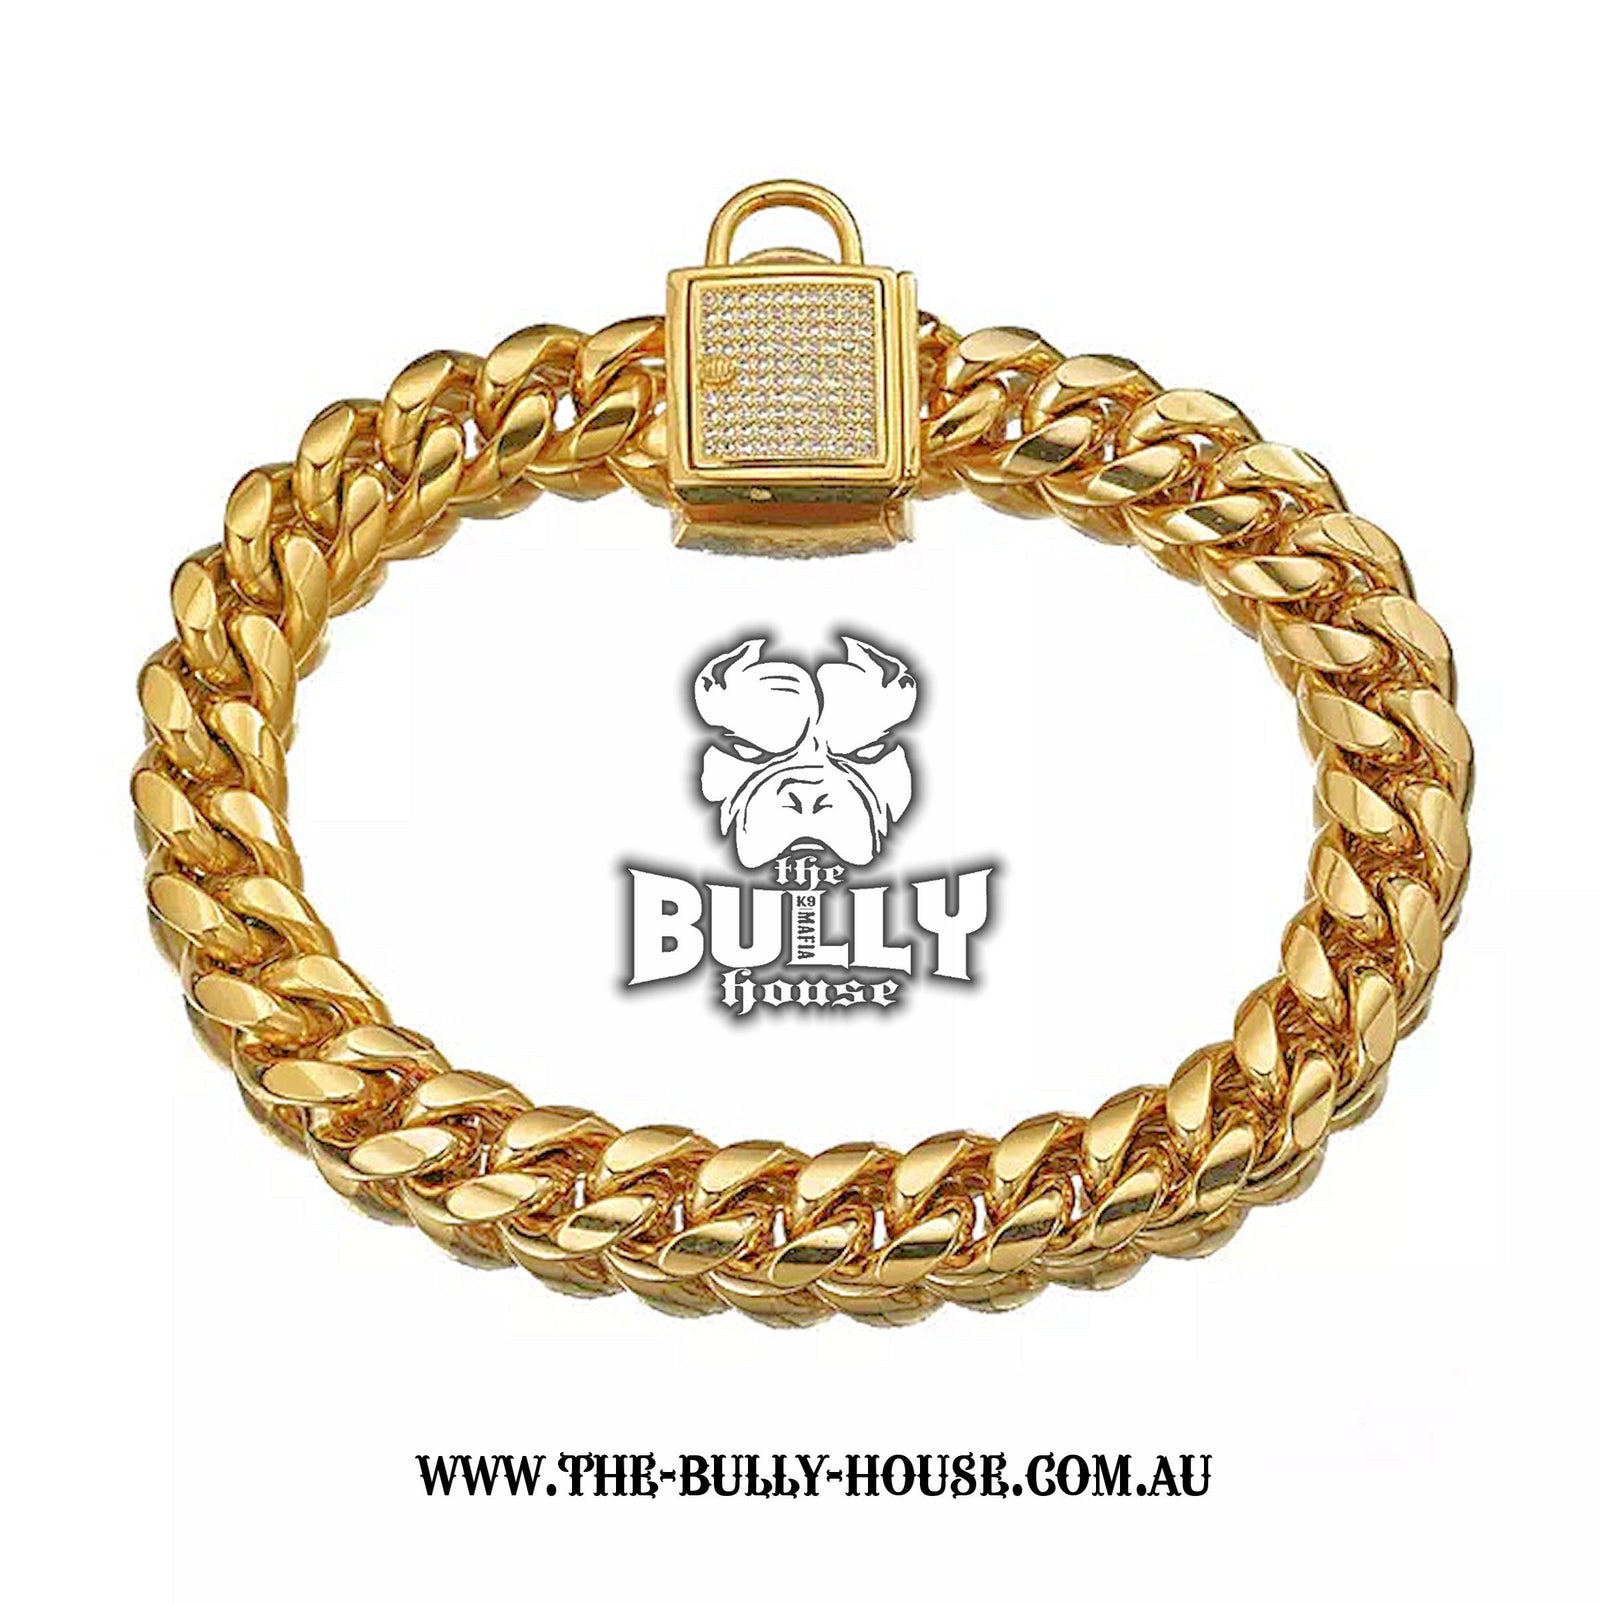 (Pre Order Now - Arriving approx end of DEC) The Bully House "MIAMI Diamond Padlock" - GOLD 14mm Wide -